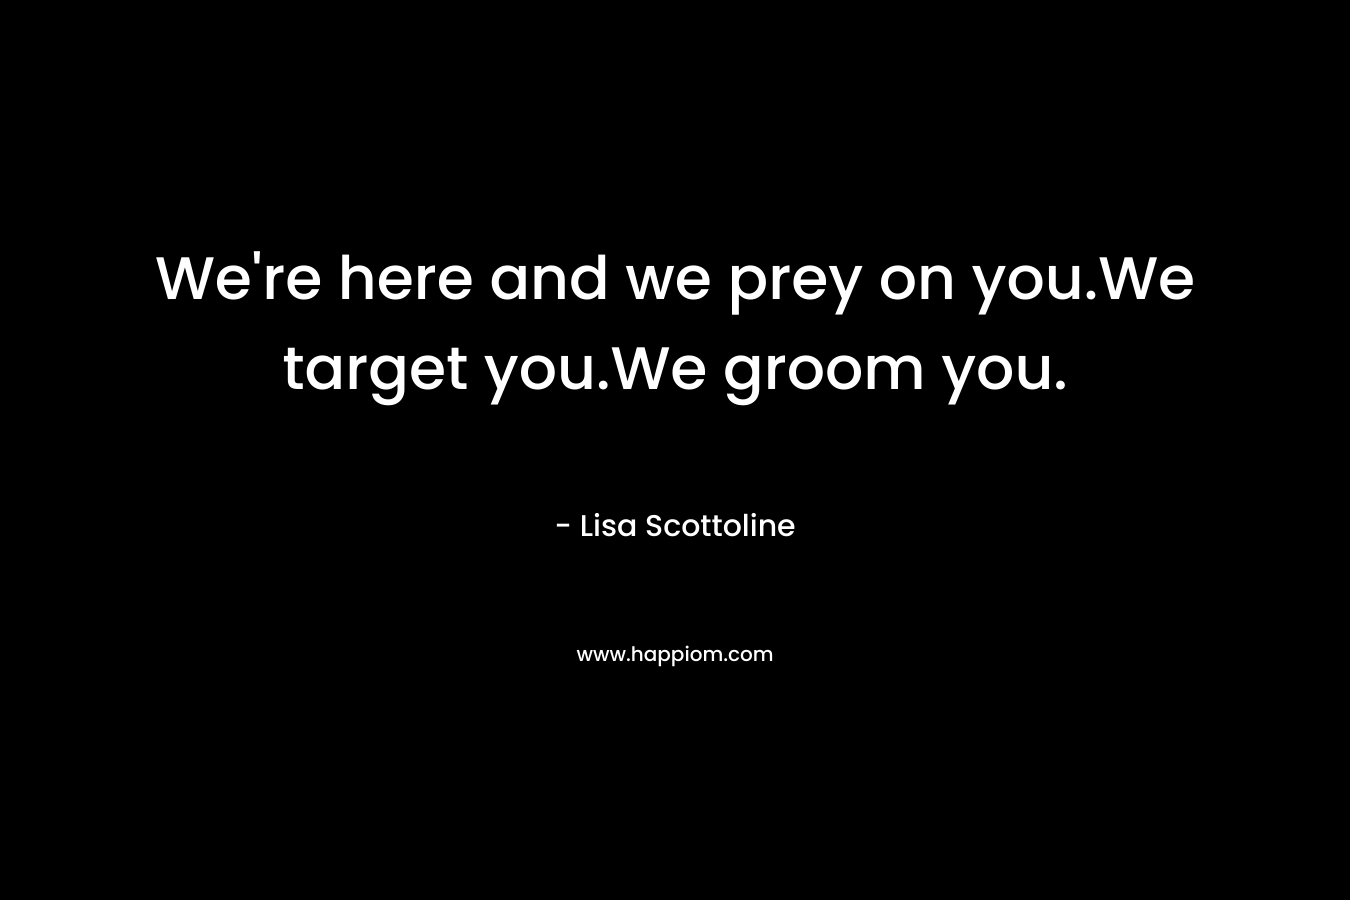 We’re here and we prey on you.We target you.We groom you. – Lisa Scottoline